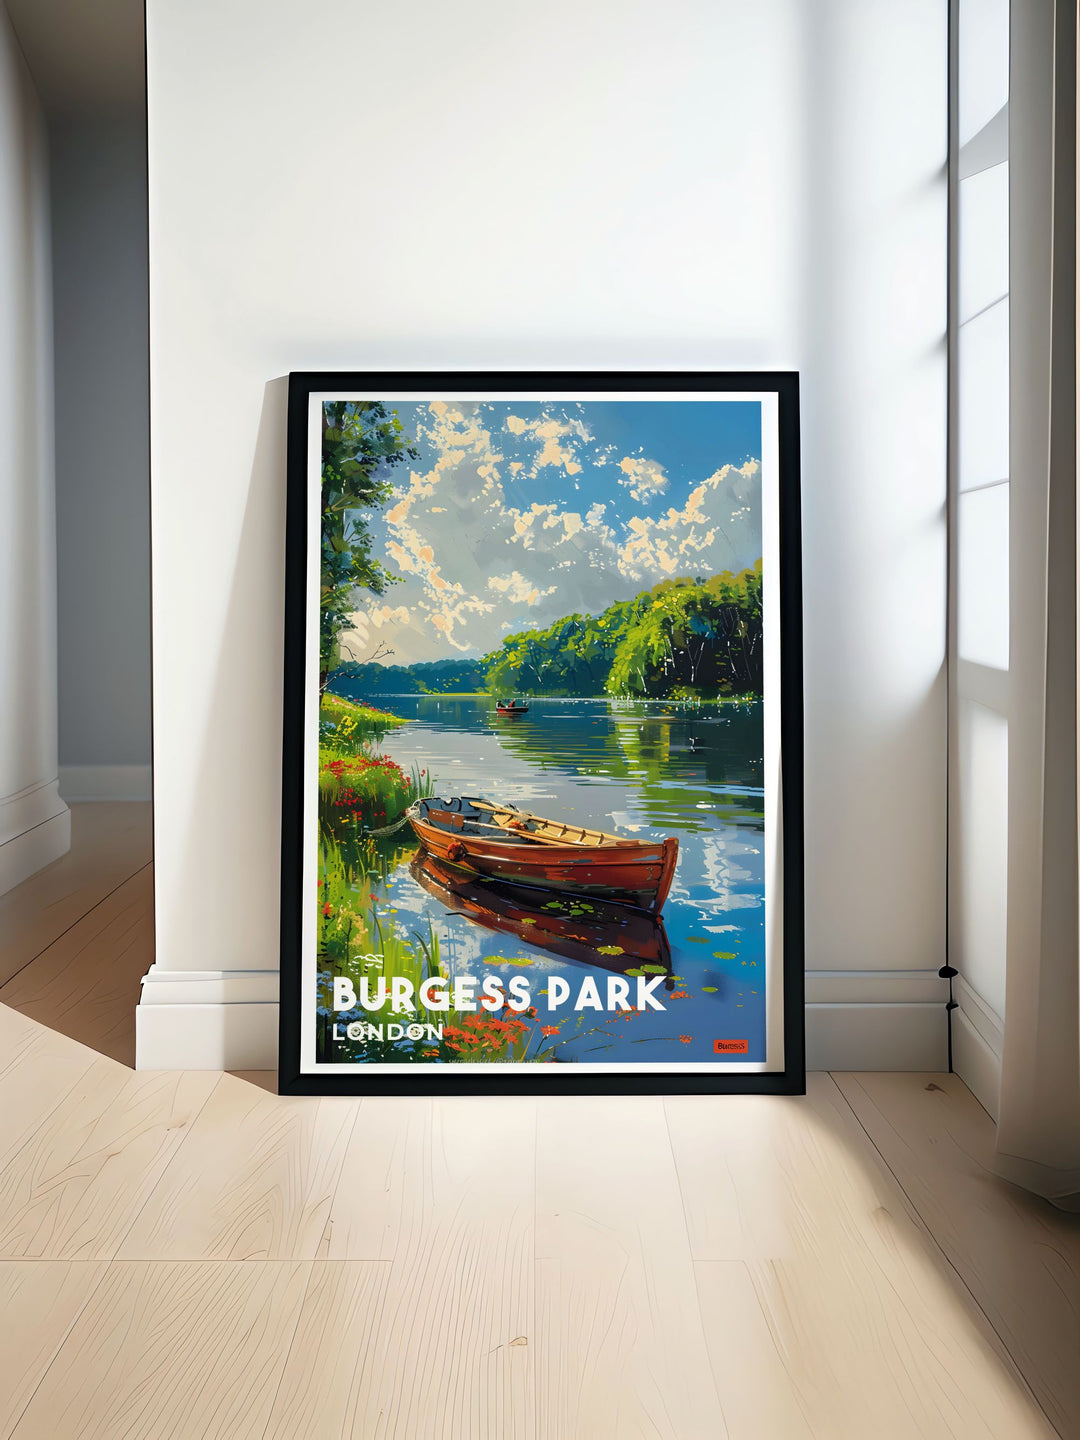 Stunning fine art print of Burgess Park Lake in London, capturing the serene waters and lush greenery that make this park a beloved urban oasis. Perfect for adding a touch of natural beauty to any room, this print showcases one of South East Londons hidden gems.